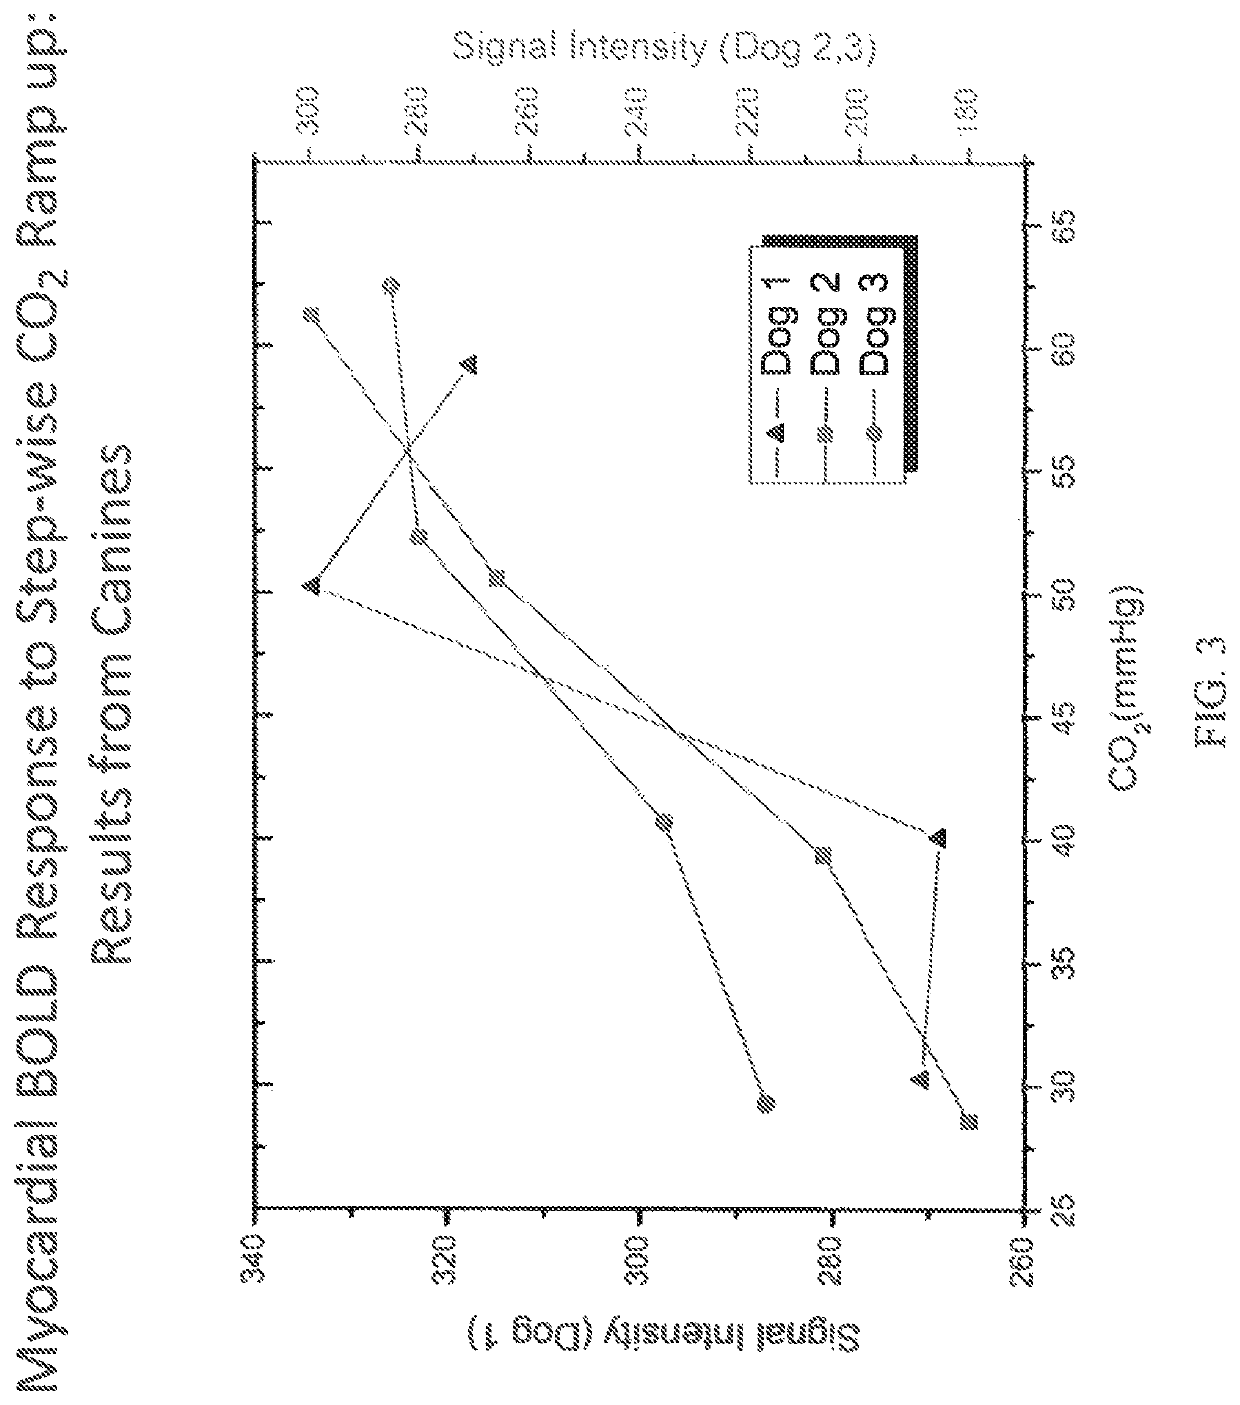 Assessment of coronary heart disease with carbon dioxide